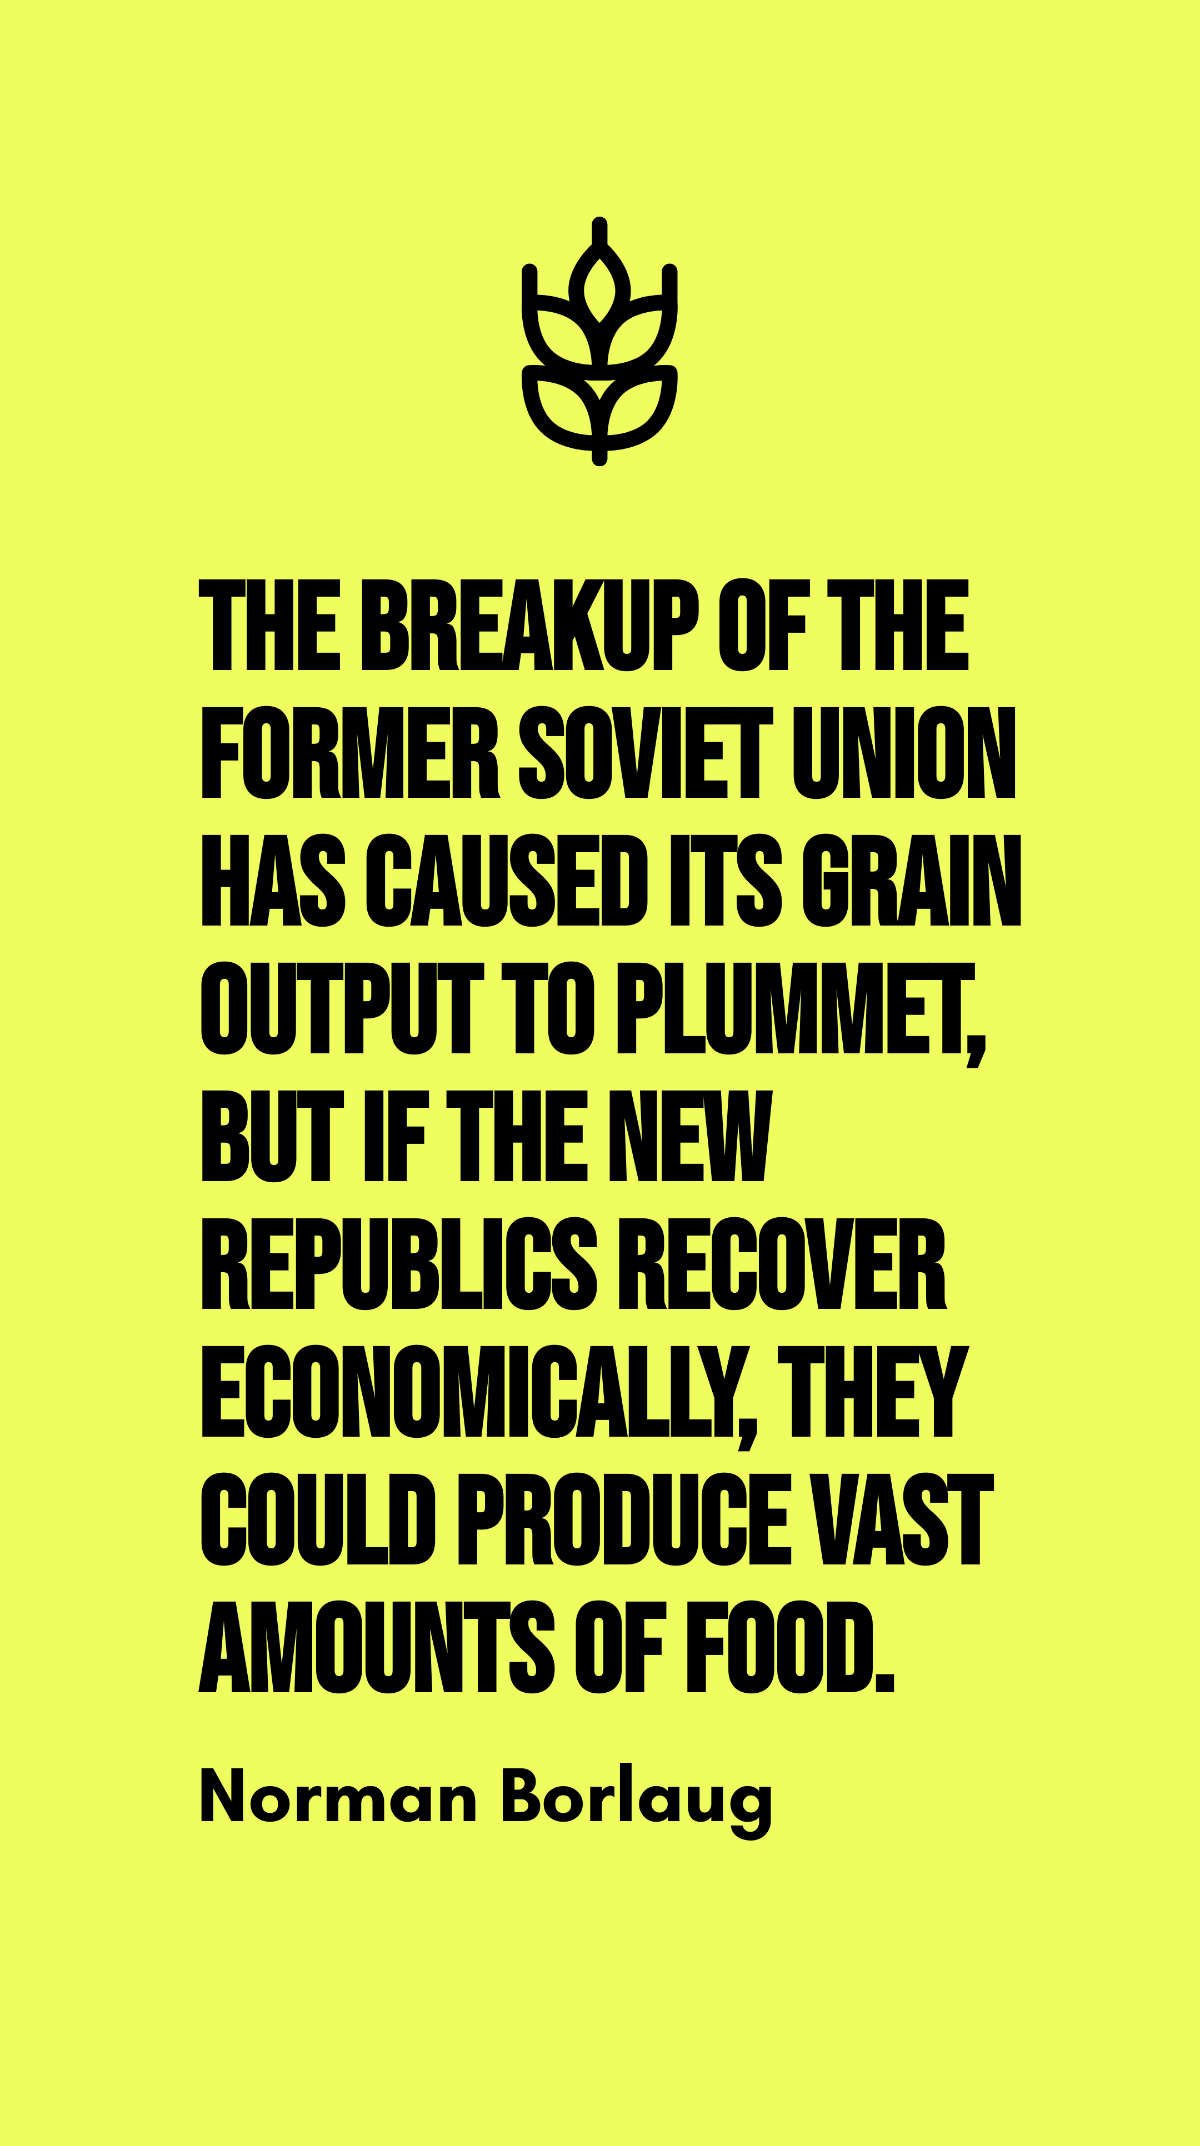 Norman Borlaug - The breakup of the former Soviet Union has caused its grain output to plummet, but if the new republics recover economically, they could produce vast amounts of food. Template